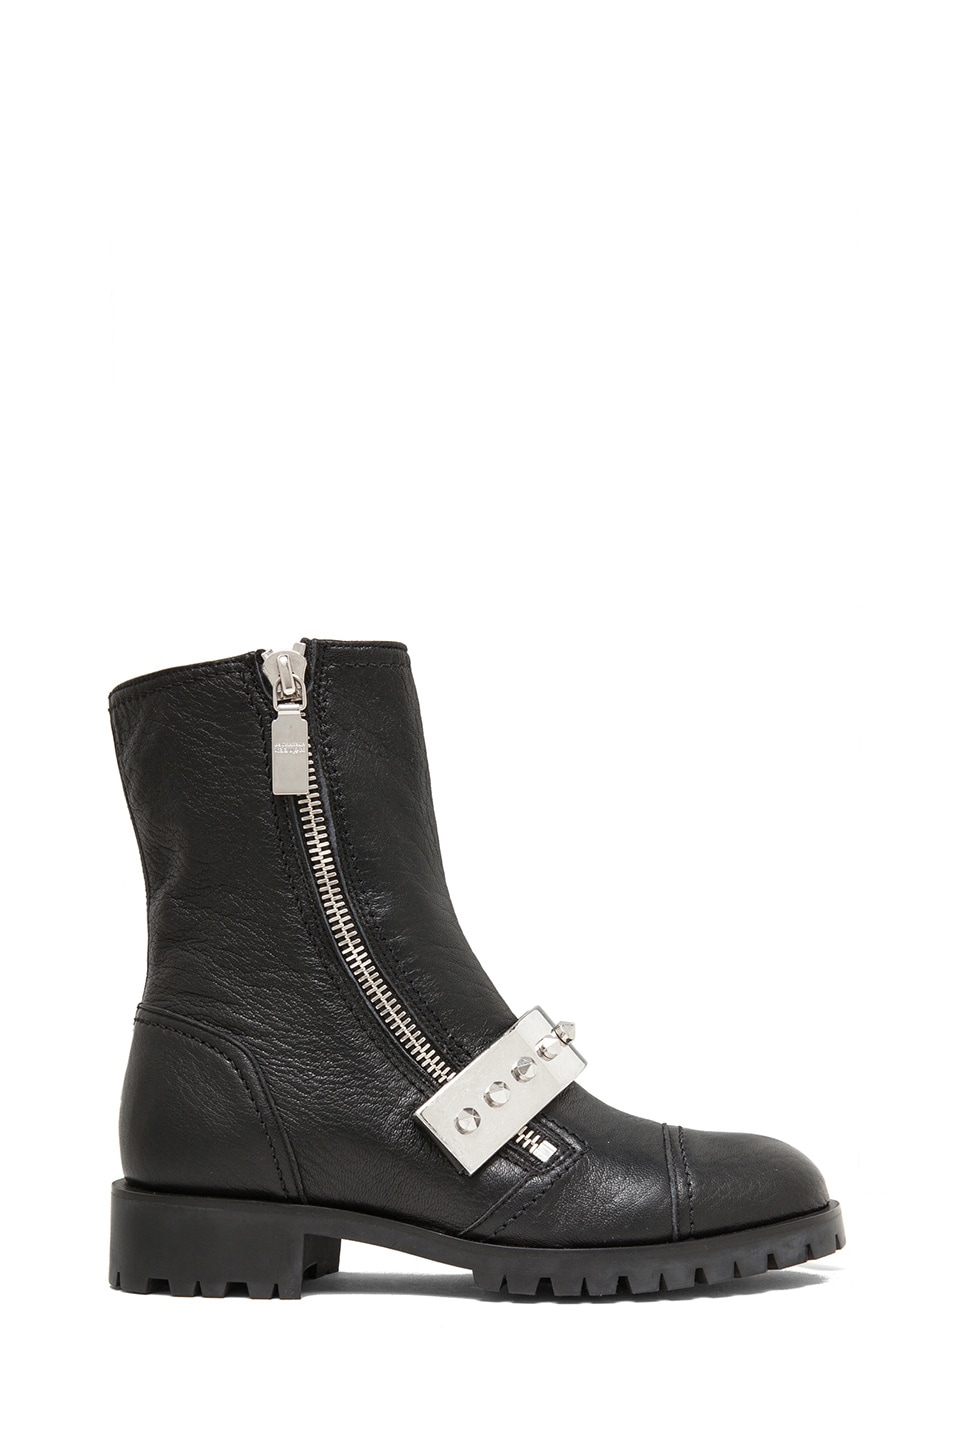 Image 1 of Alexander McQueen Calfskin Leather Boots in Black & Silver